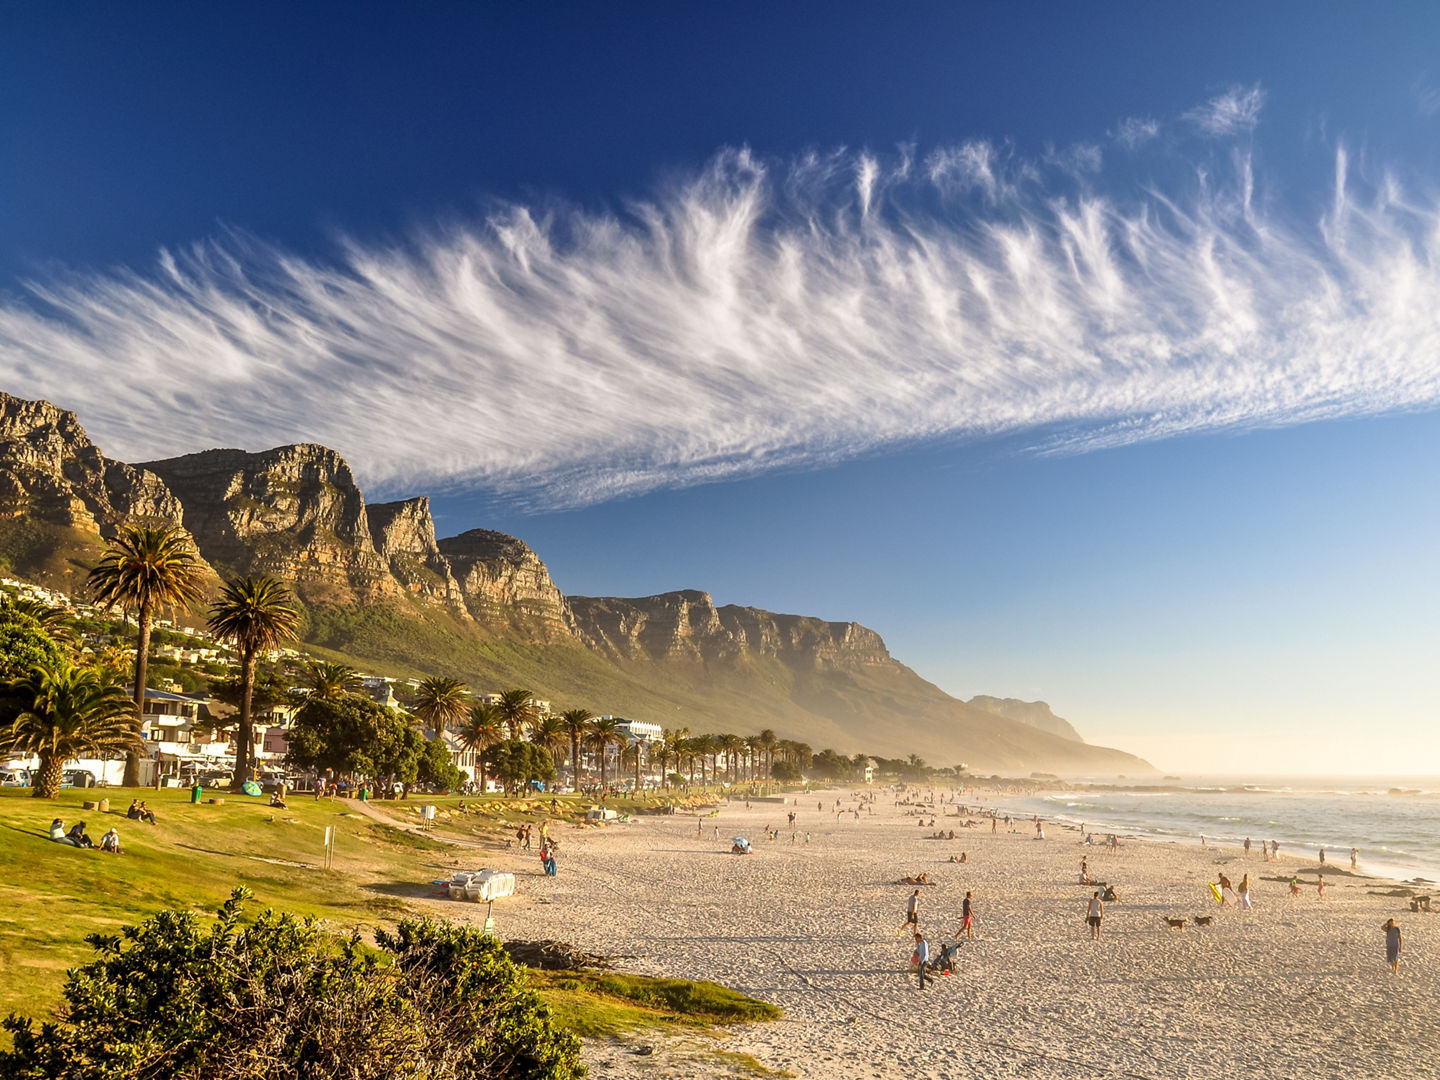 Stunning evening photo of Camps Bay, an affluent suburb of Cape Town, Western Cape, South Africa. With its white beach, Camps Bay attracts a large number of foreign visitors as well as South Africans., Stunning evening photo of Camps Bay, an affluent suburb of Cape 